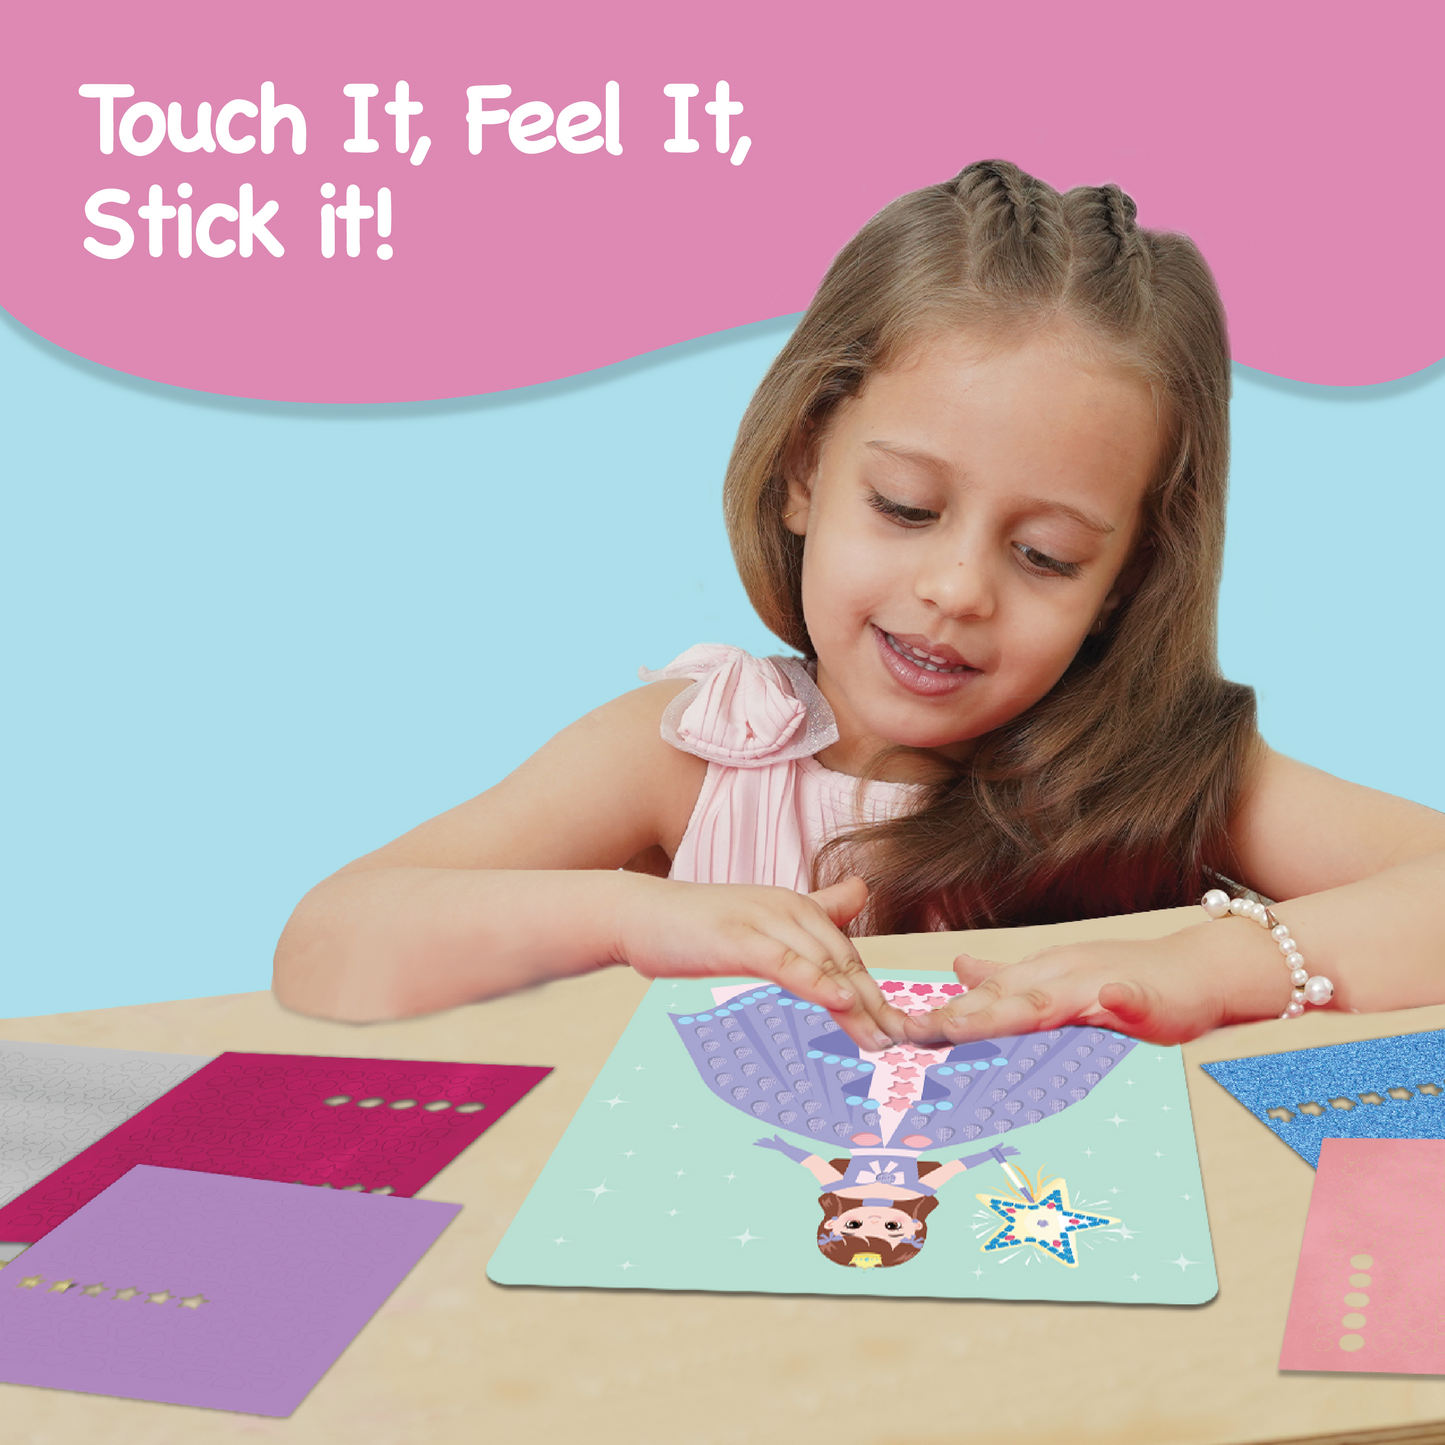 Sensory Craft Activity – Touch & Stick Textures - Magical, No Mess Sticker Craft for Kids, Craft Kits, Sensory DIY Activity, Gifts for Boys & Girls Ages 3, 4, 5, 6, Travel Toys